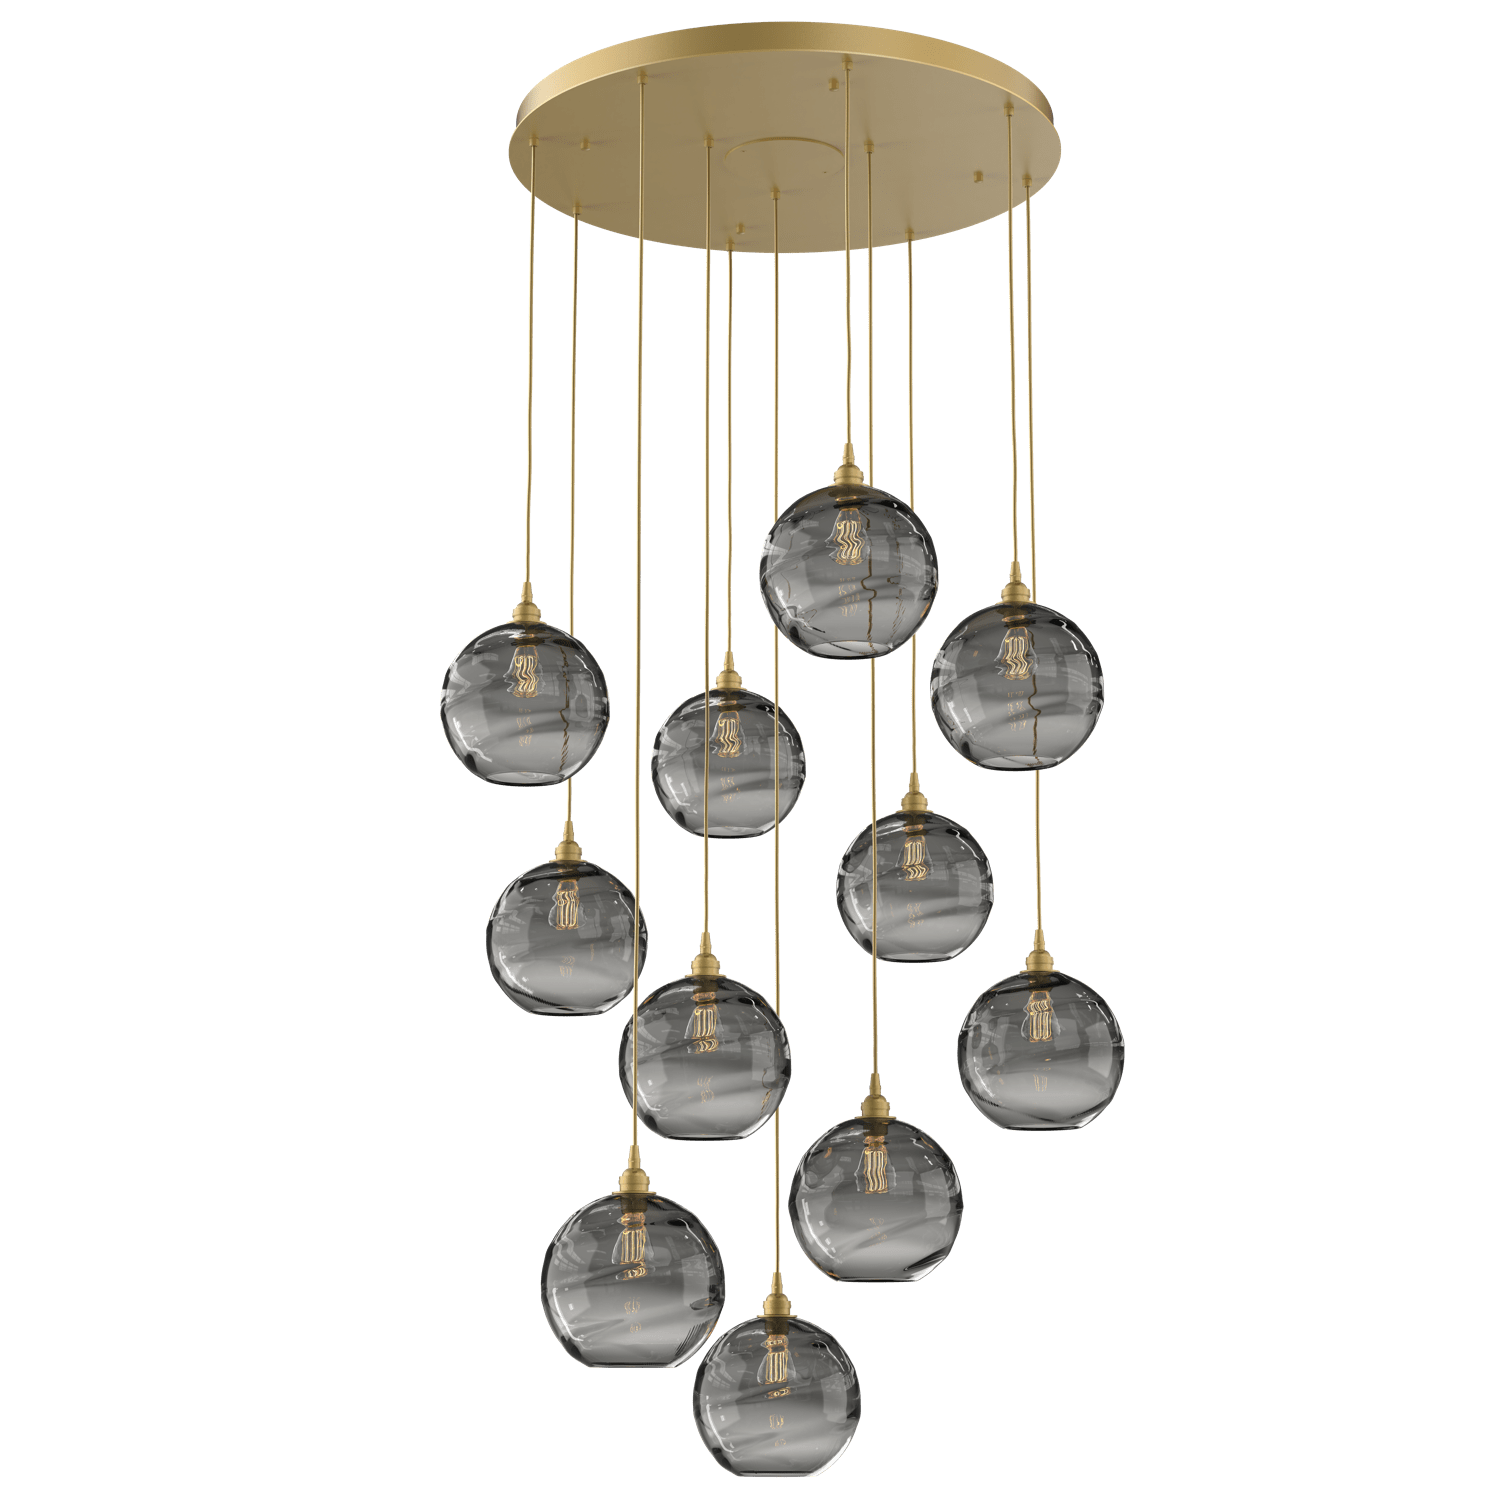 CHB0047-11-GB-OS-Hammerton-Studio-Optic-Blown-Glass-Terra-11-light-round-pendant-chandelier-with-gilded-brass-finish-and-optic-smoke-blown-glass-shades-and-incandescent-lamping